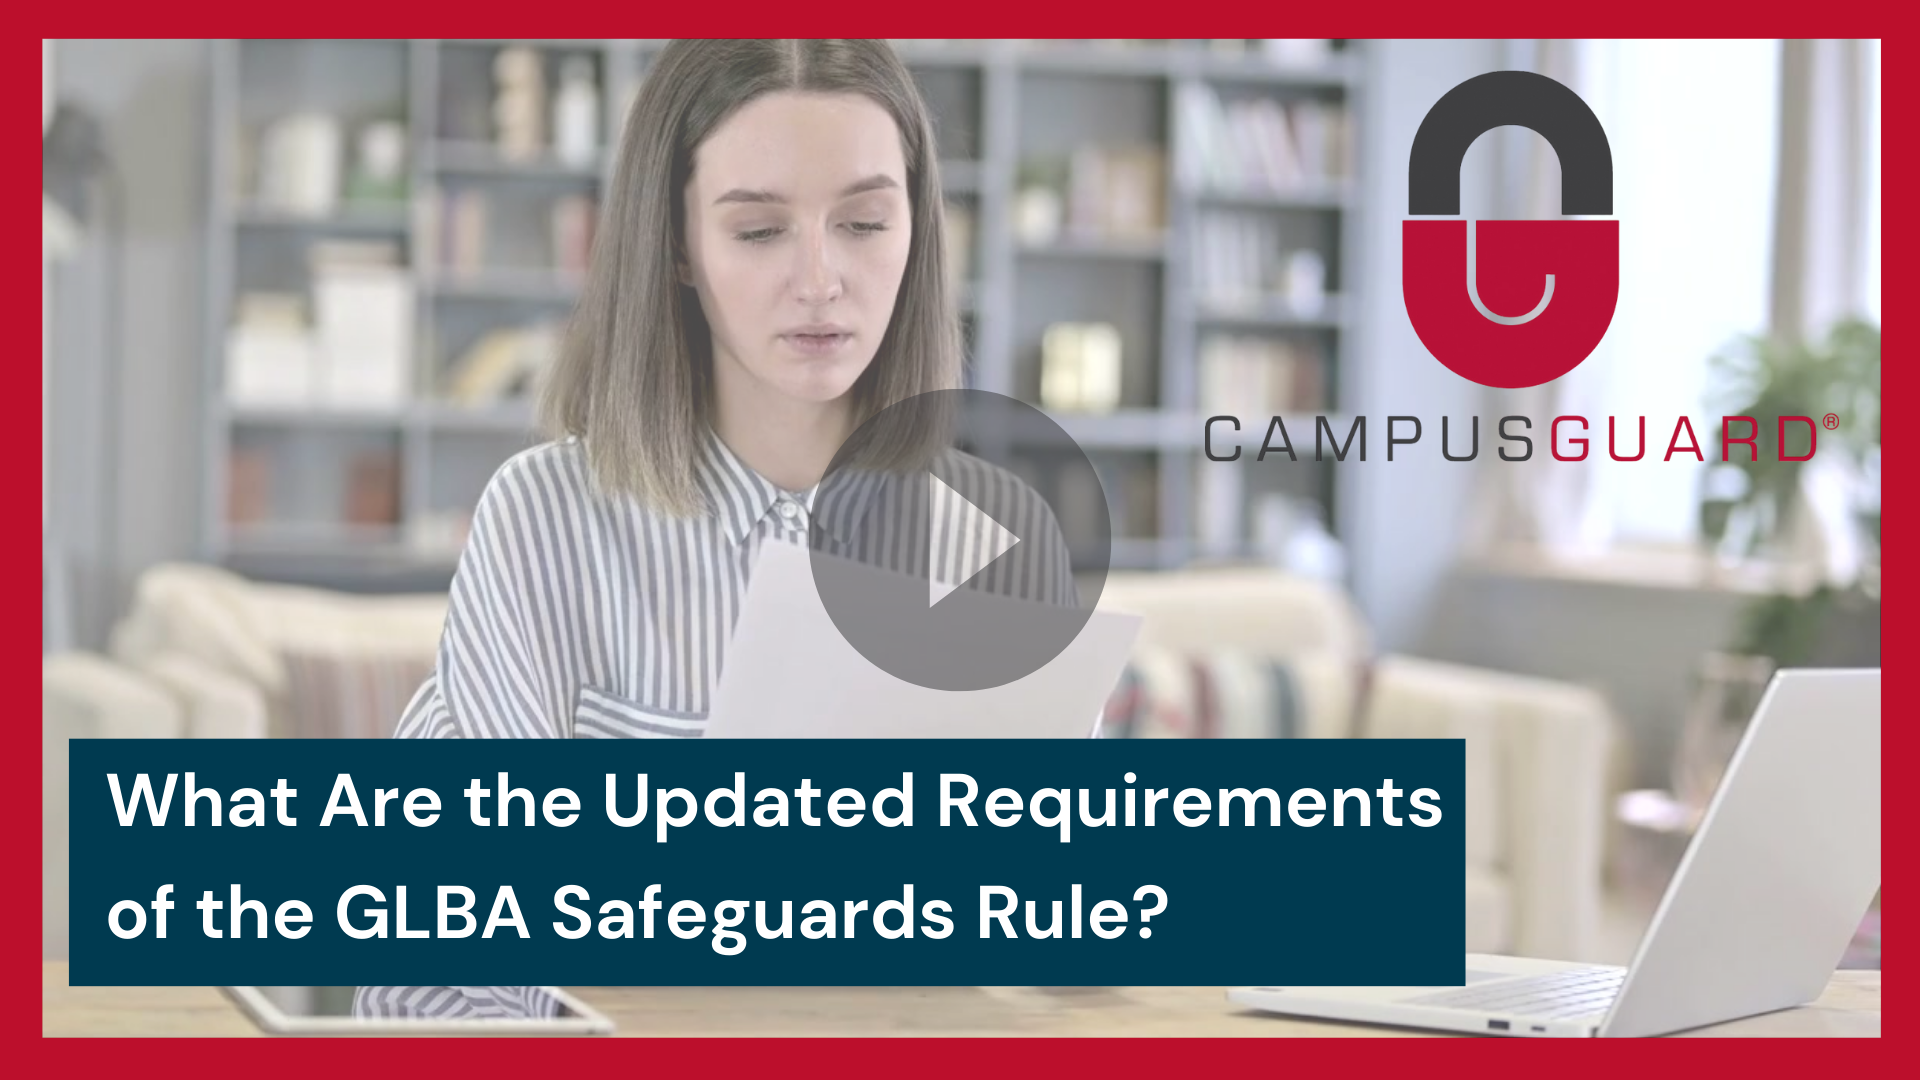 GLBA Updates to the Safeguards Rule